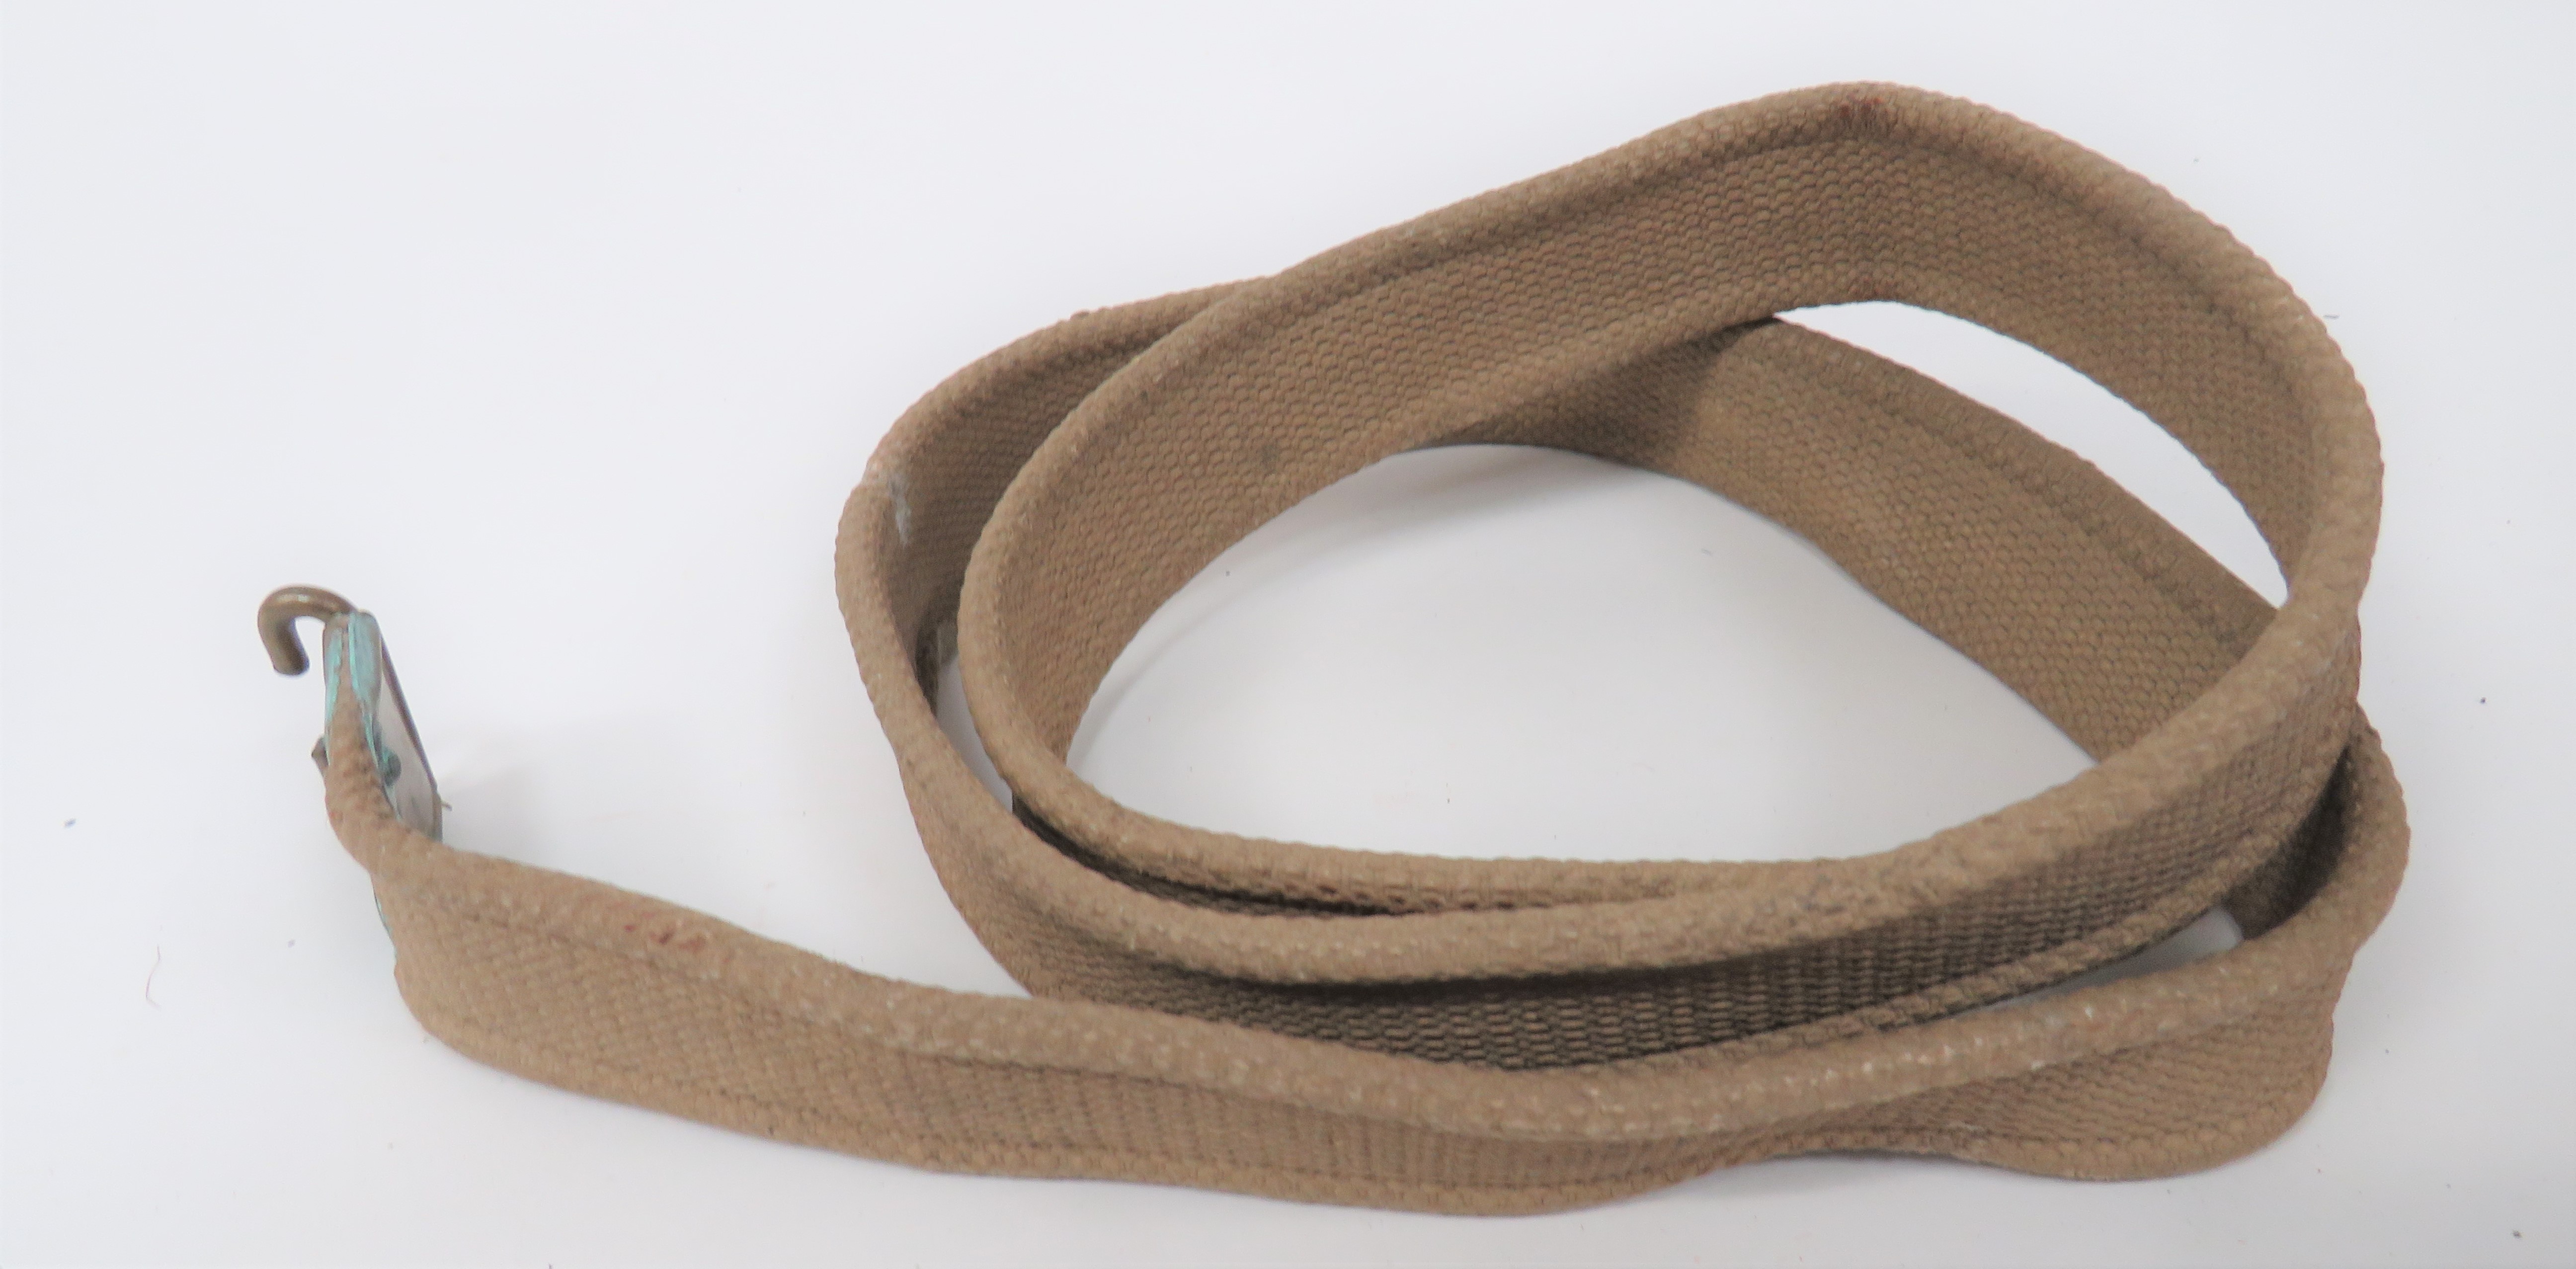 WW1 Dated SMLE Webbing Rifle Sling khaki webbing sling.  The brass end fittings stamped "M.E.Co